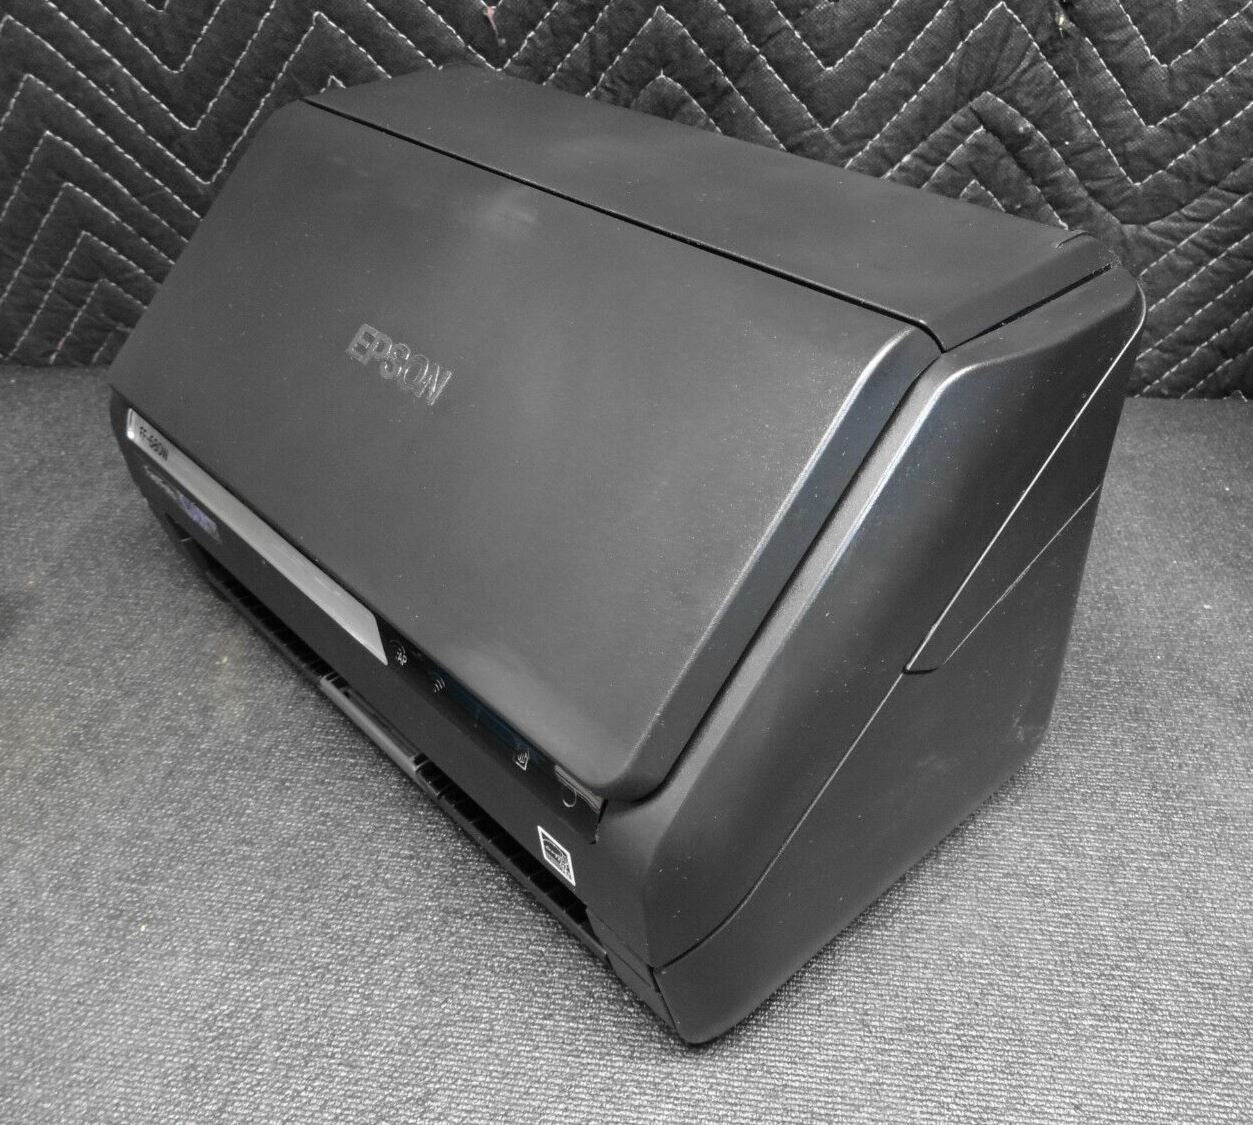 Epson Fastfoto FF-680W Wireless Photo and Document Scanning System